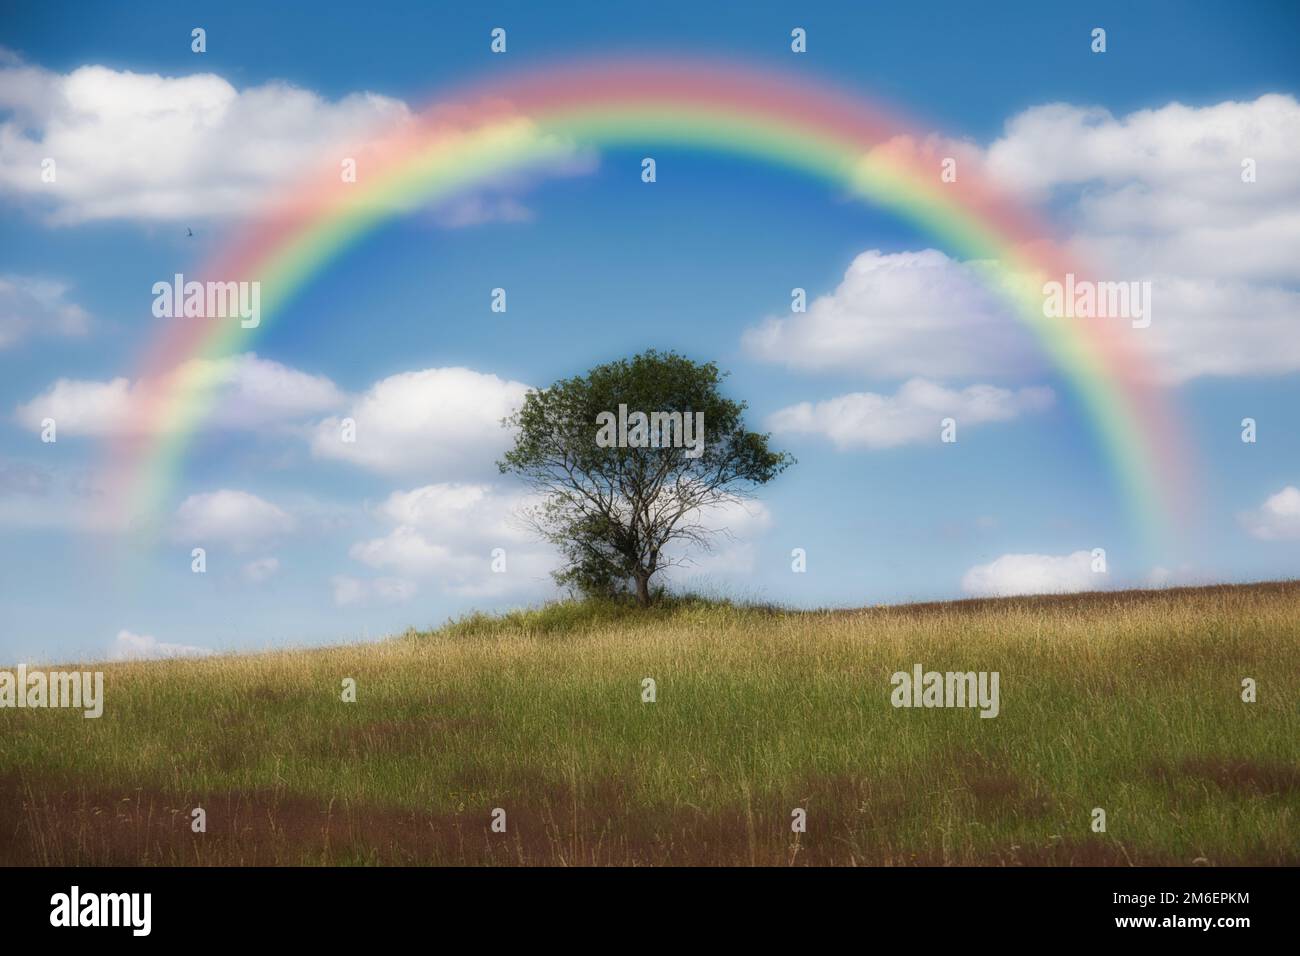 Heather landscape with grasses, rainbow and individual trees Stock Photo